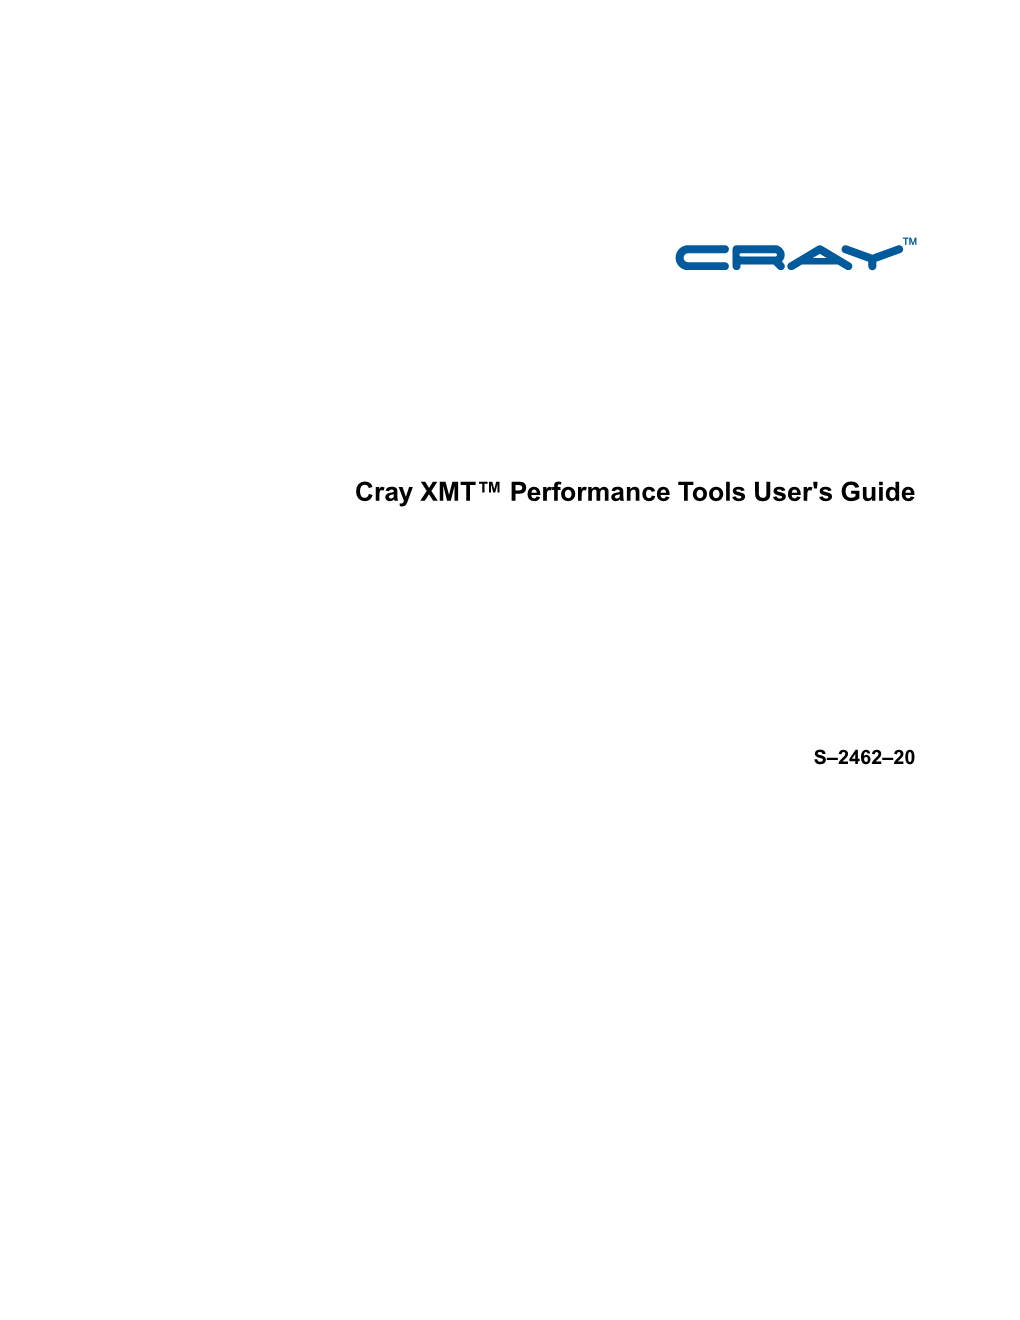 Cray XMT™ Performance Tools User's Guide